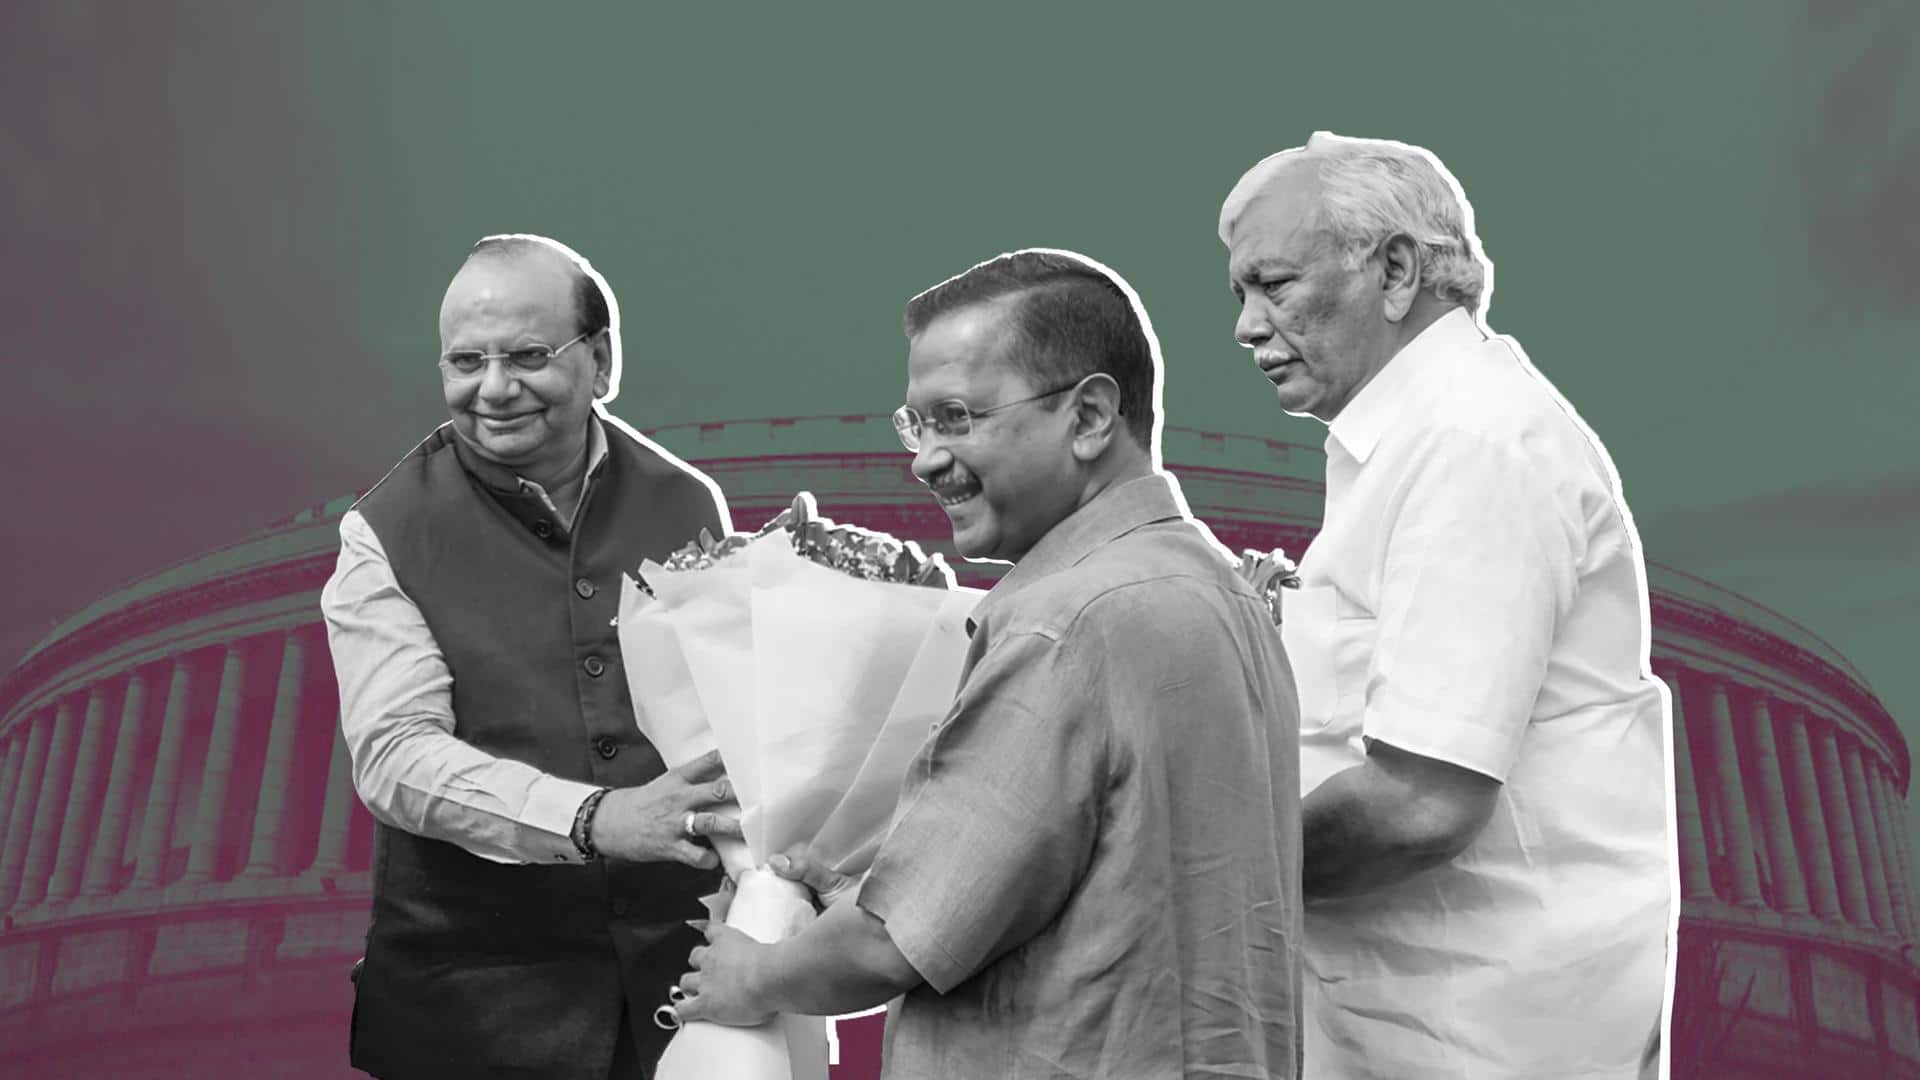 Delhi budget session: All the major developments that took place